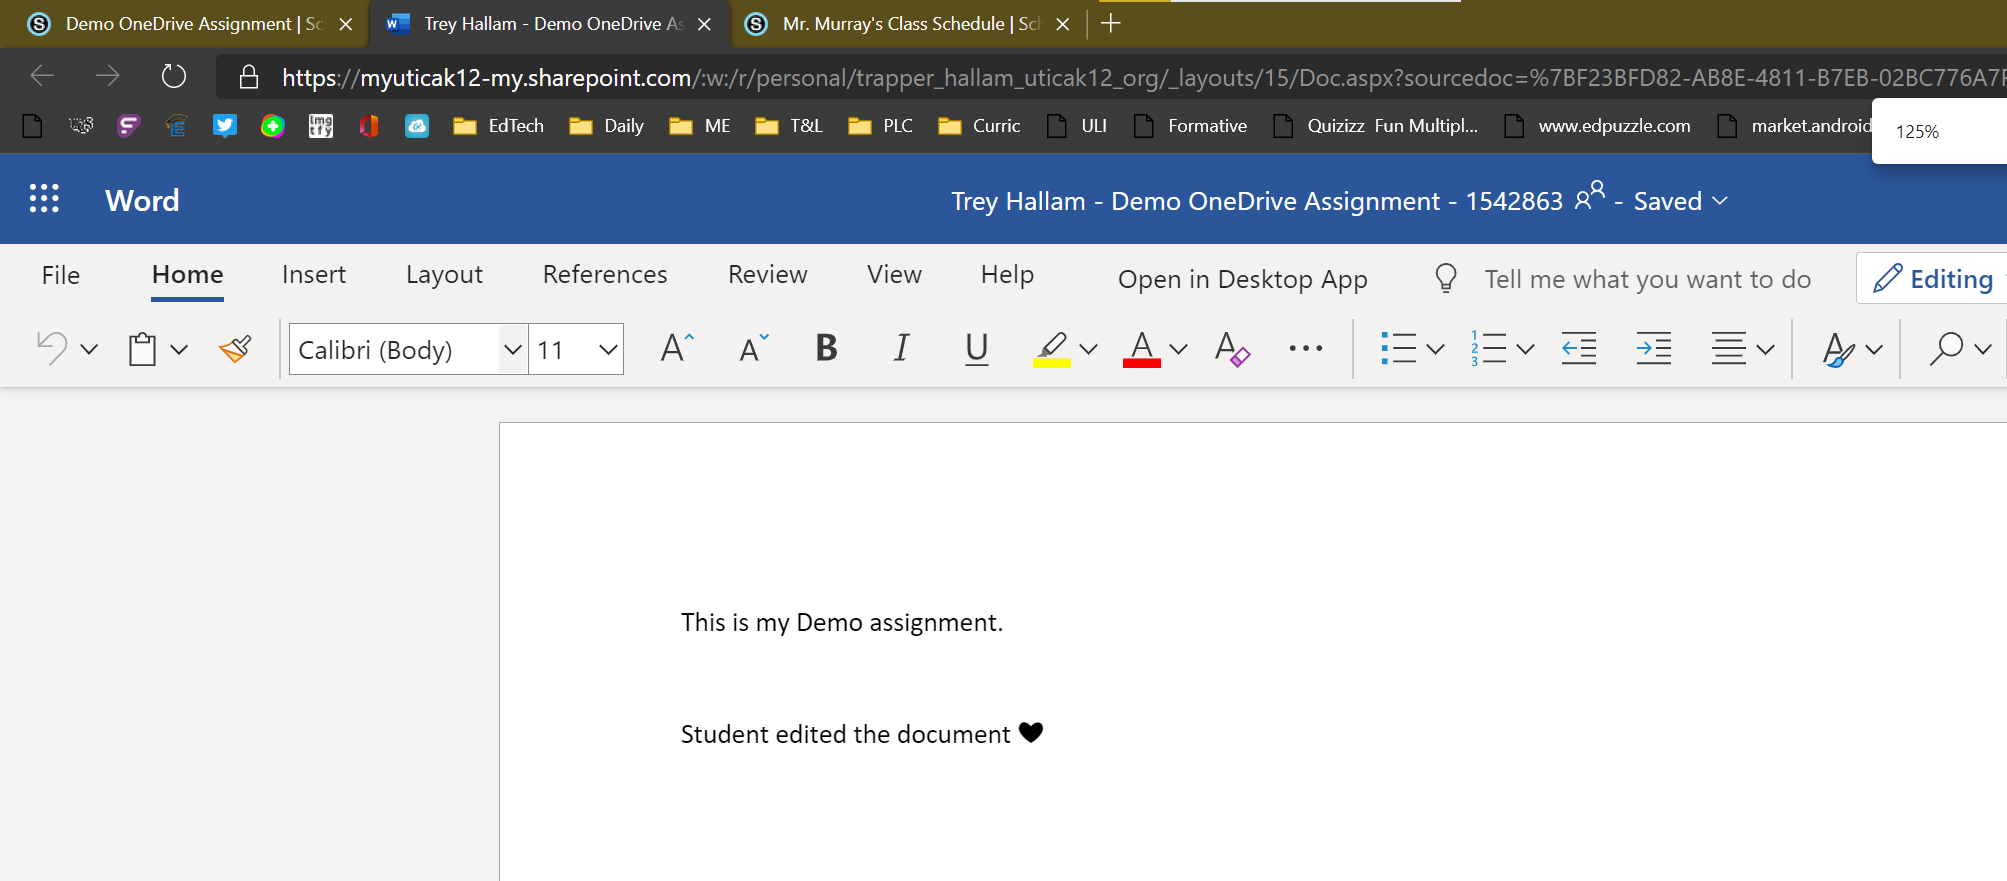 Demo OneDrive AssignmentlSc X Trey Hallam - Demo OneDriveAl X Mr. Murray's Class Schedule I Scl X CD https://myuticak12-my.sharepoint.com •p •S • EdTech Daily ME PLC Curric Quizizz Fun Multipl... market-androi 125% Word Home Trey Hallam - Demo OneDrive Assignment - 1542863 RR - Saved v File Insert Layout References Calibri (Body) v 11 v Review View 1 Help Open in Desktop App Tell me what you want to do Editing This is my Demo assignment. Student edited the document